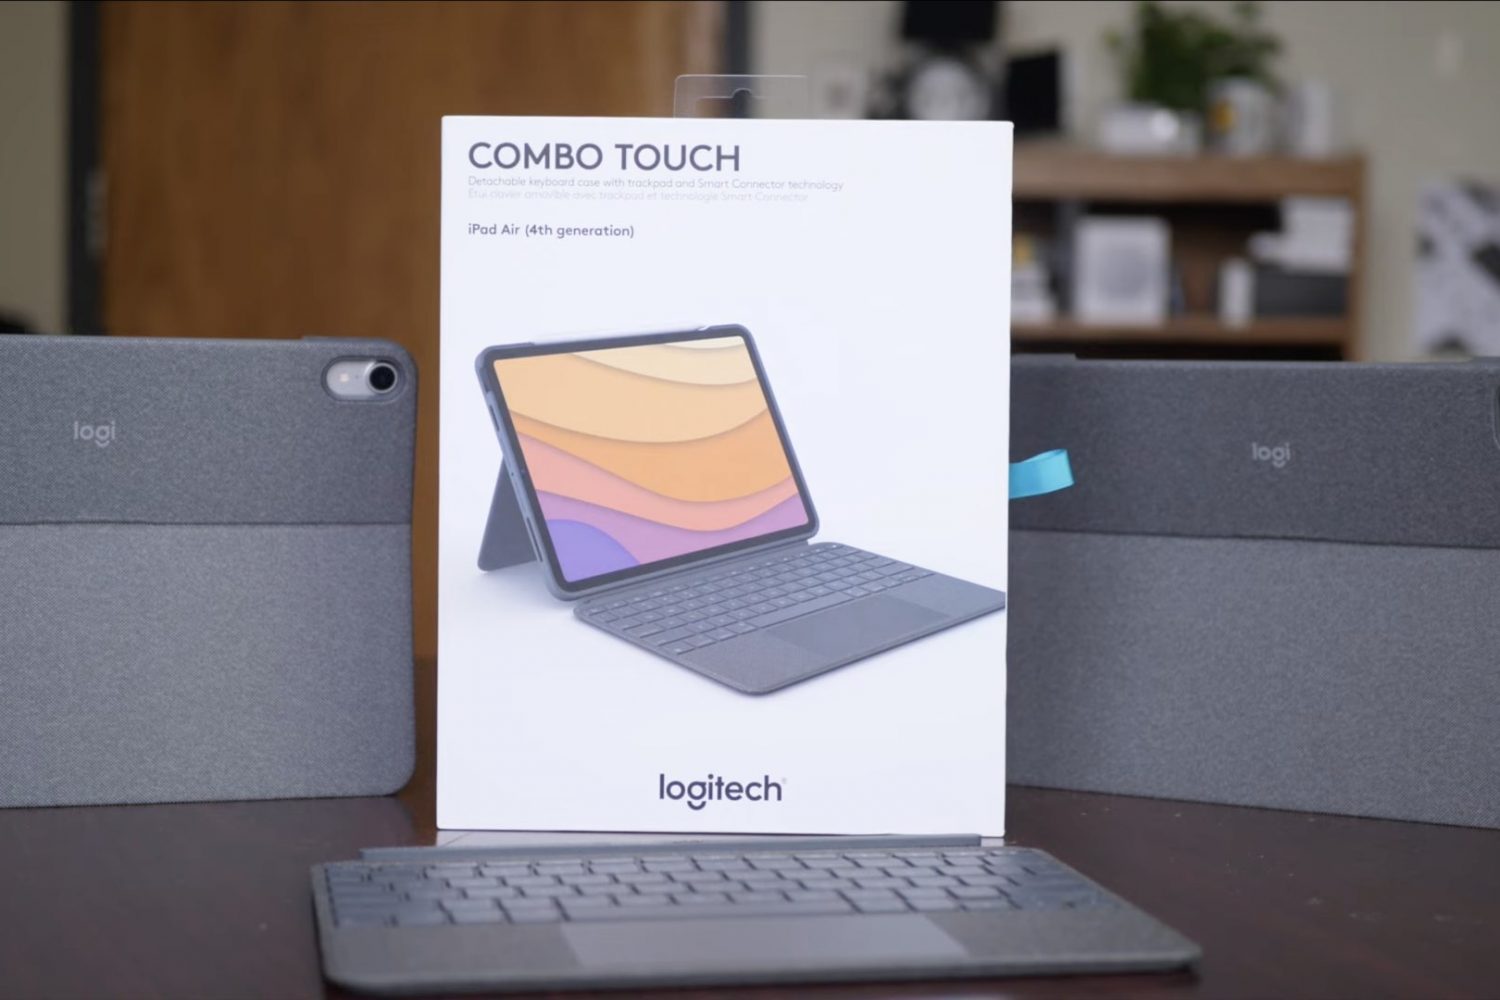 A photo showing packaging of Logitech's Combo Keyboard accessory for iPad Air 4